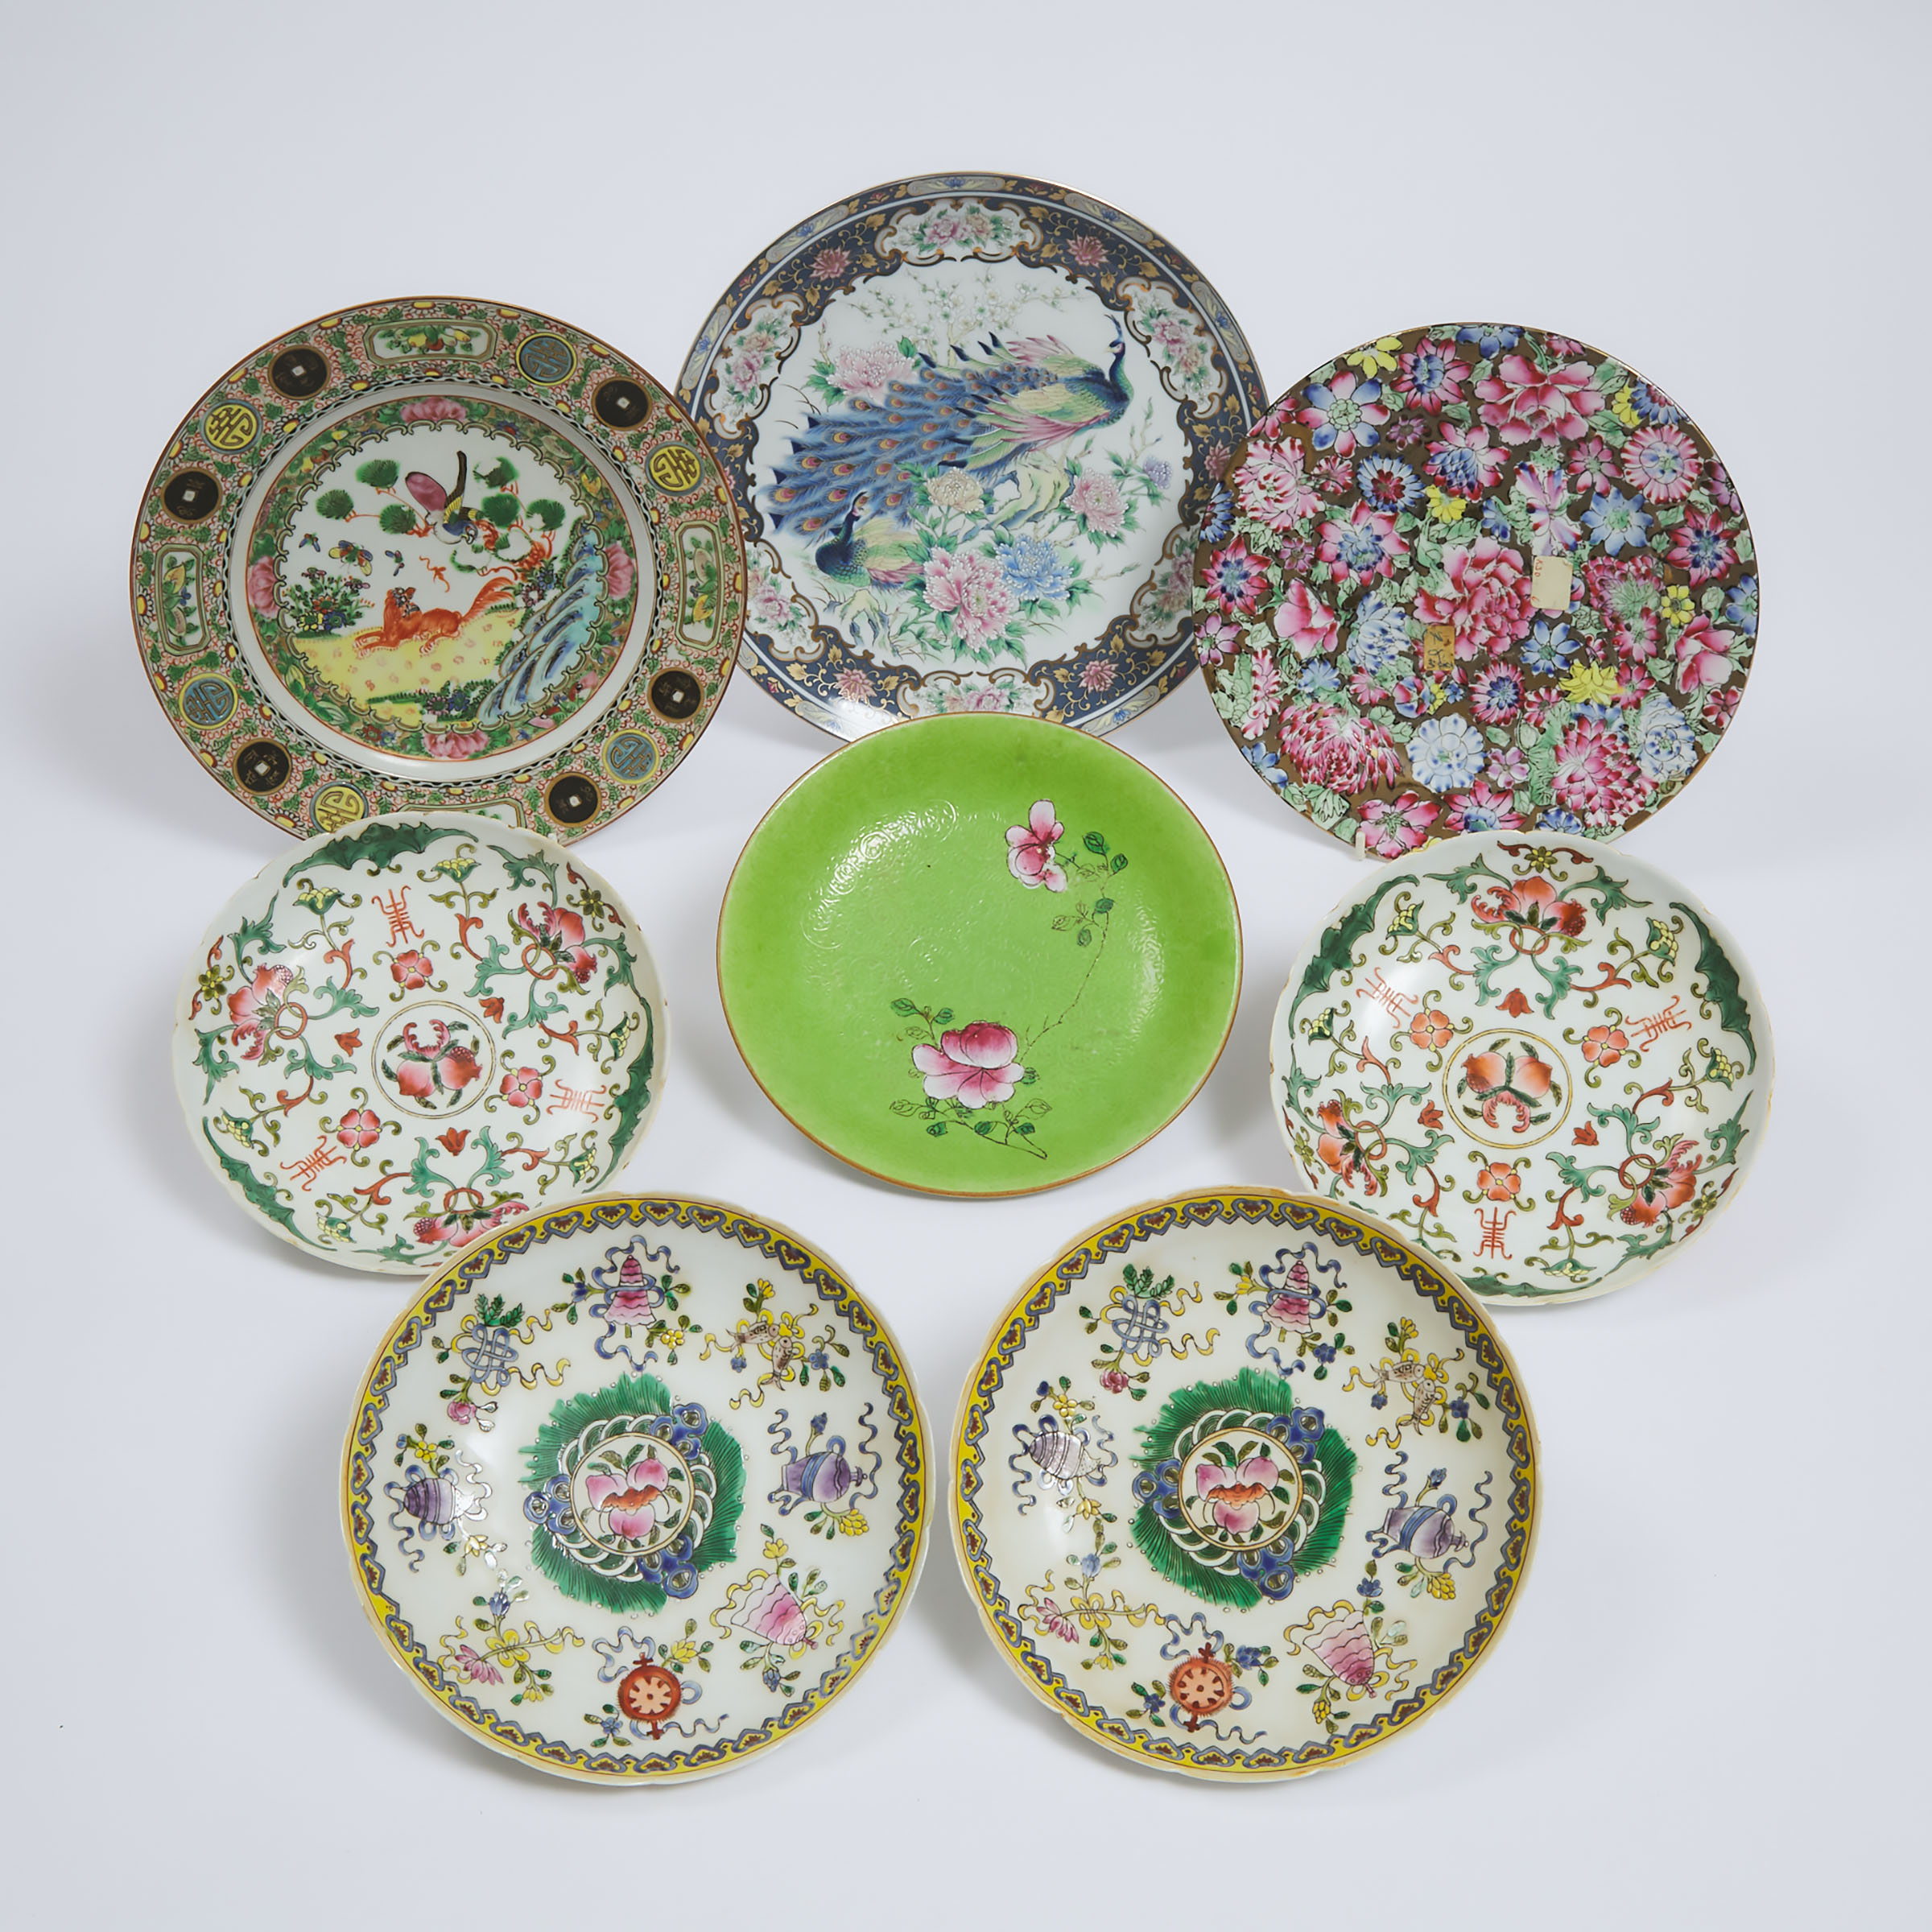 A Group of Eight Famille Rose Porcelain Dishes, 19th/20th Century